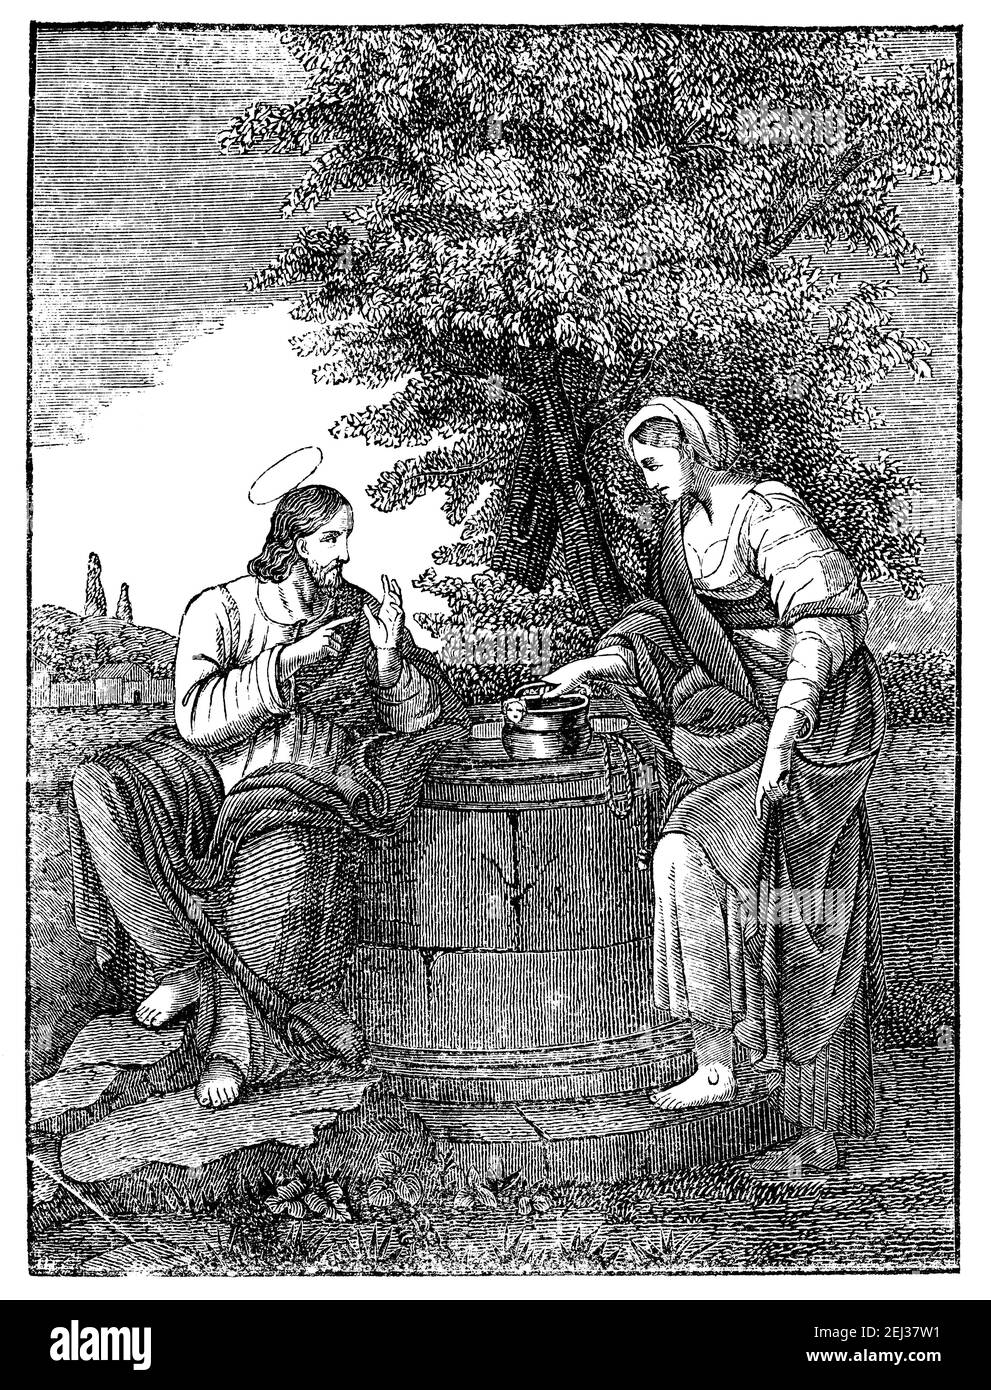 Jesus Christ talks with Samaritan Woman near well.Vintage antique illustration or drawing. Bible, New Testament. Stock Photo